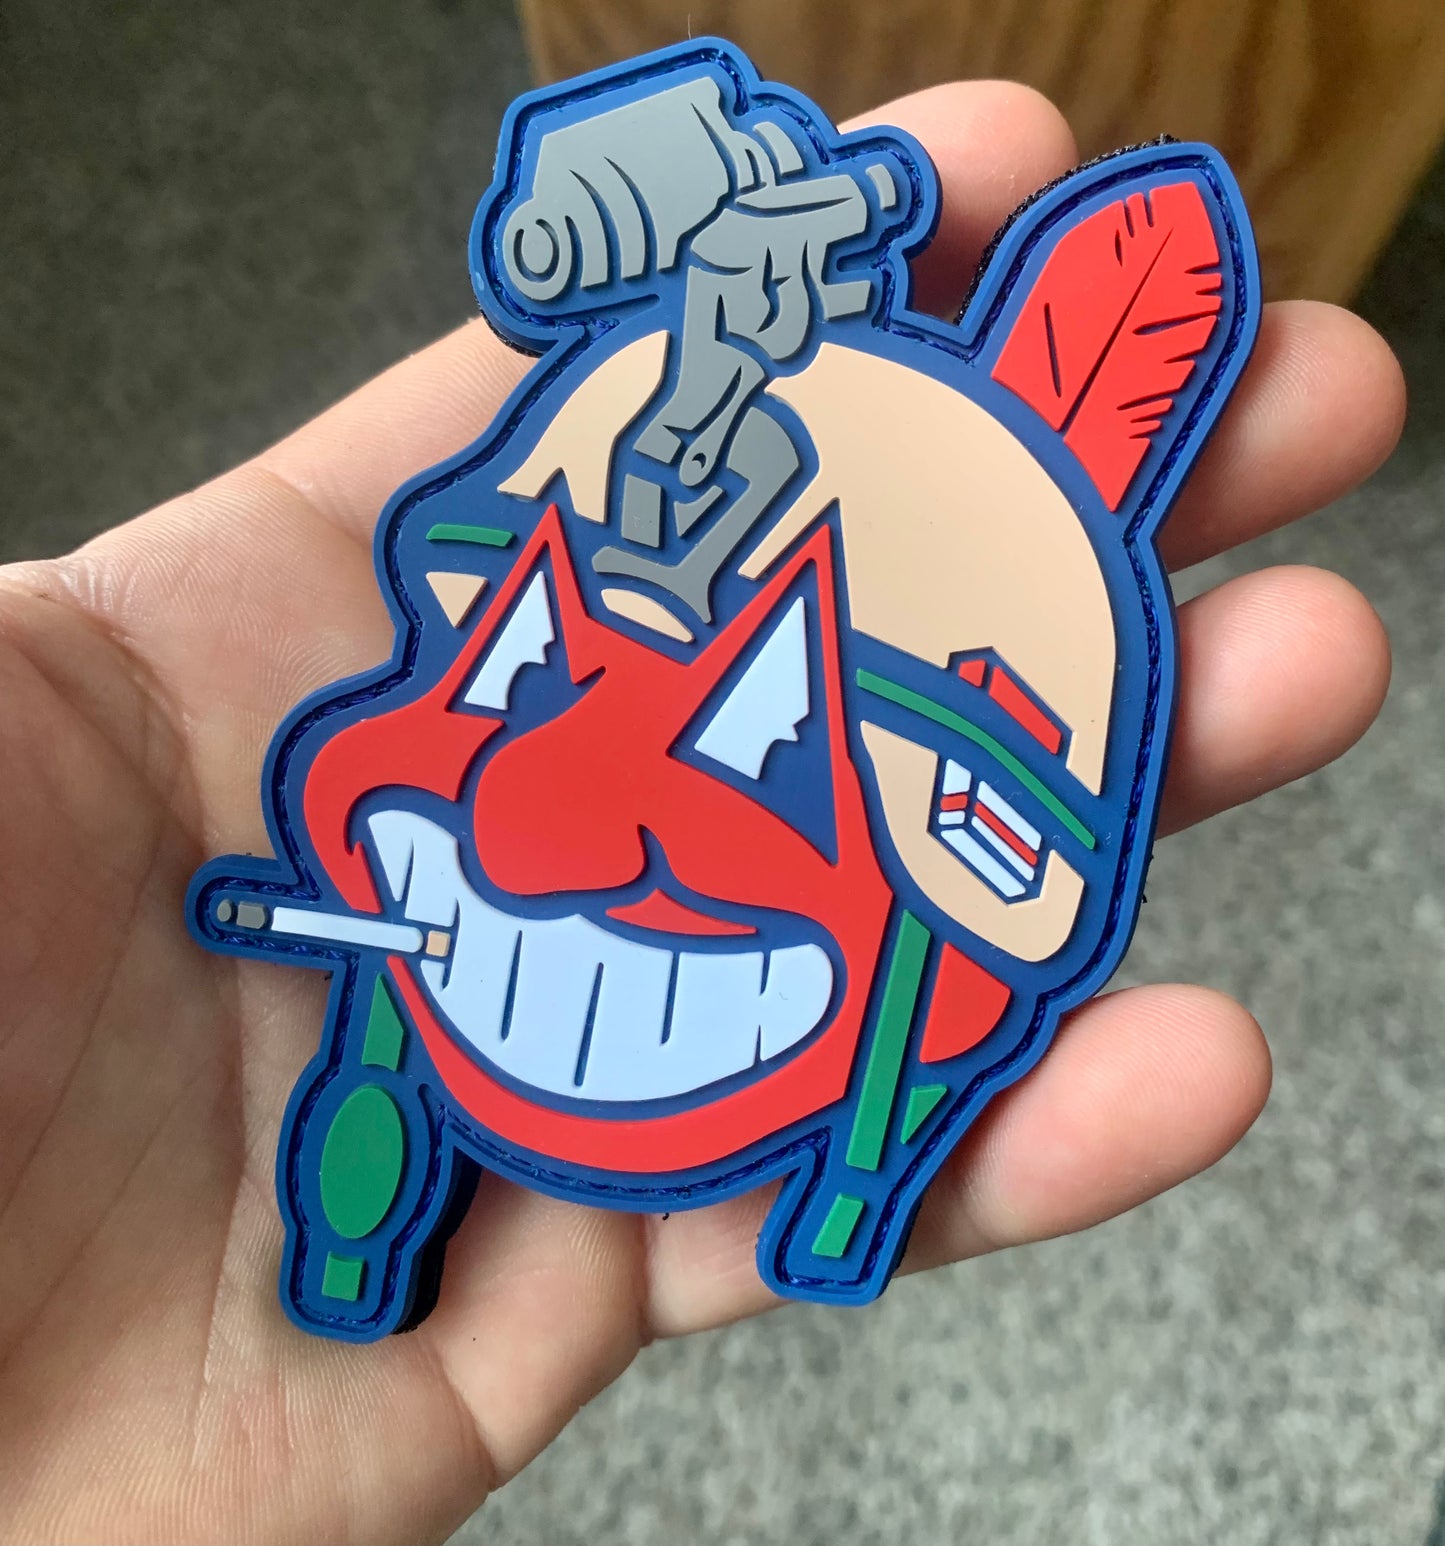 Corporal Wahoo Patch